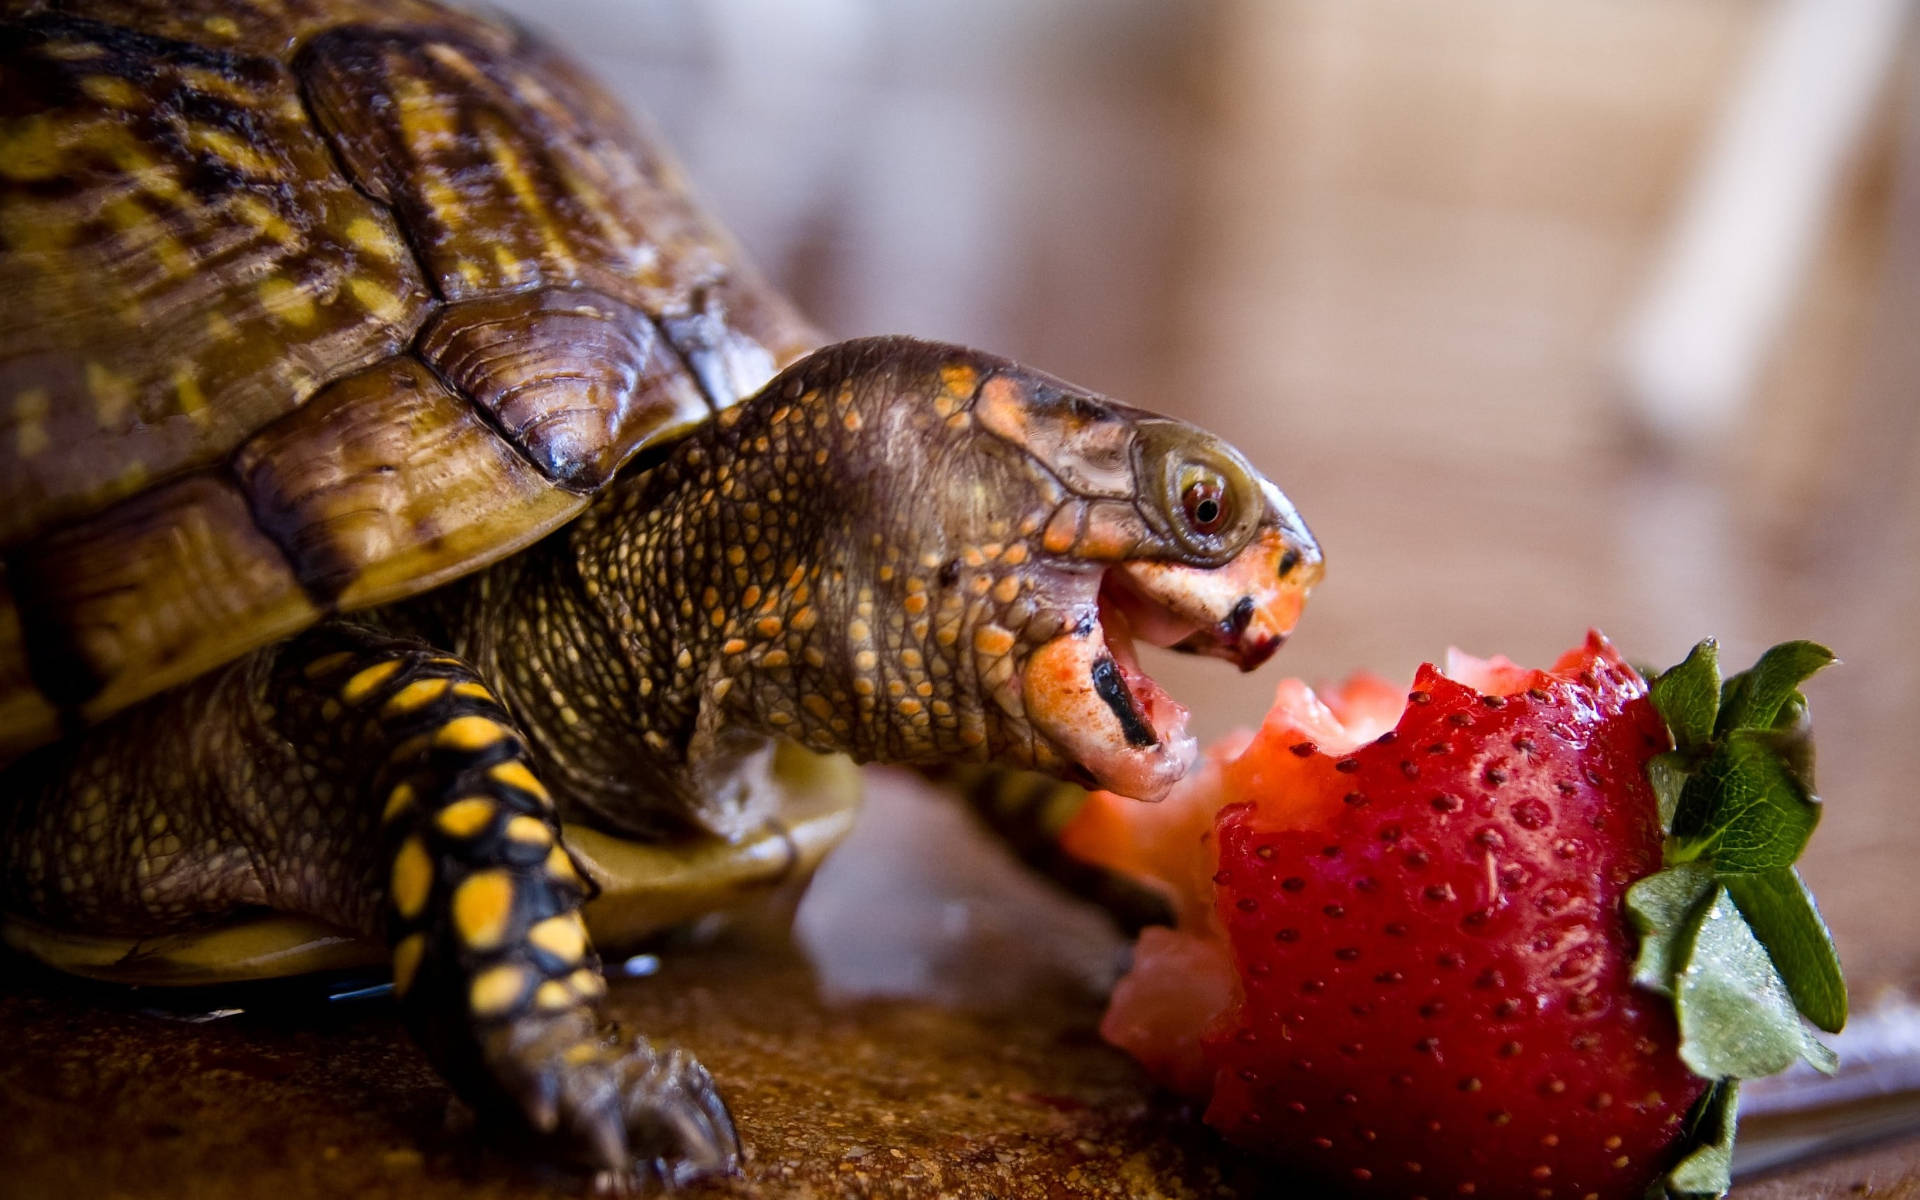 Cool Turtle Eating Strawberry